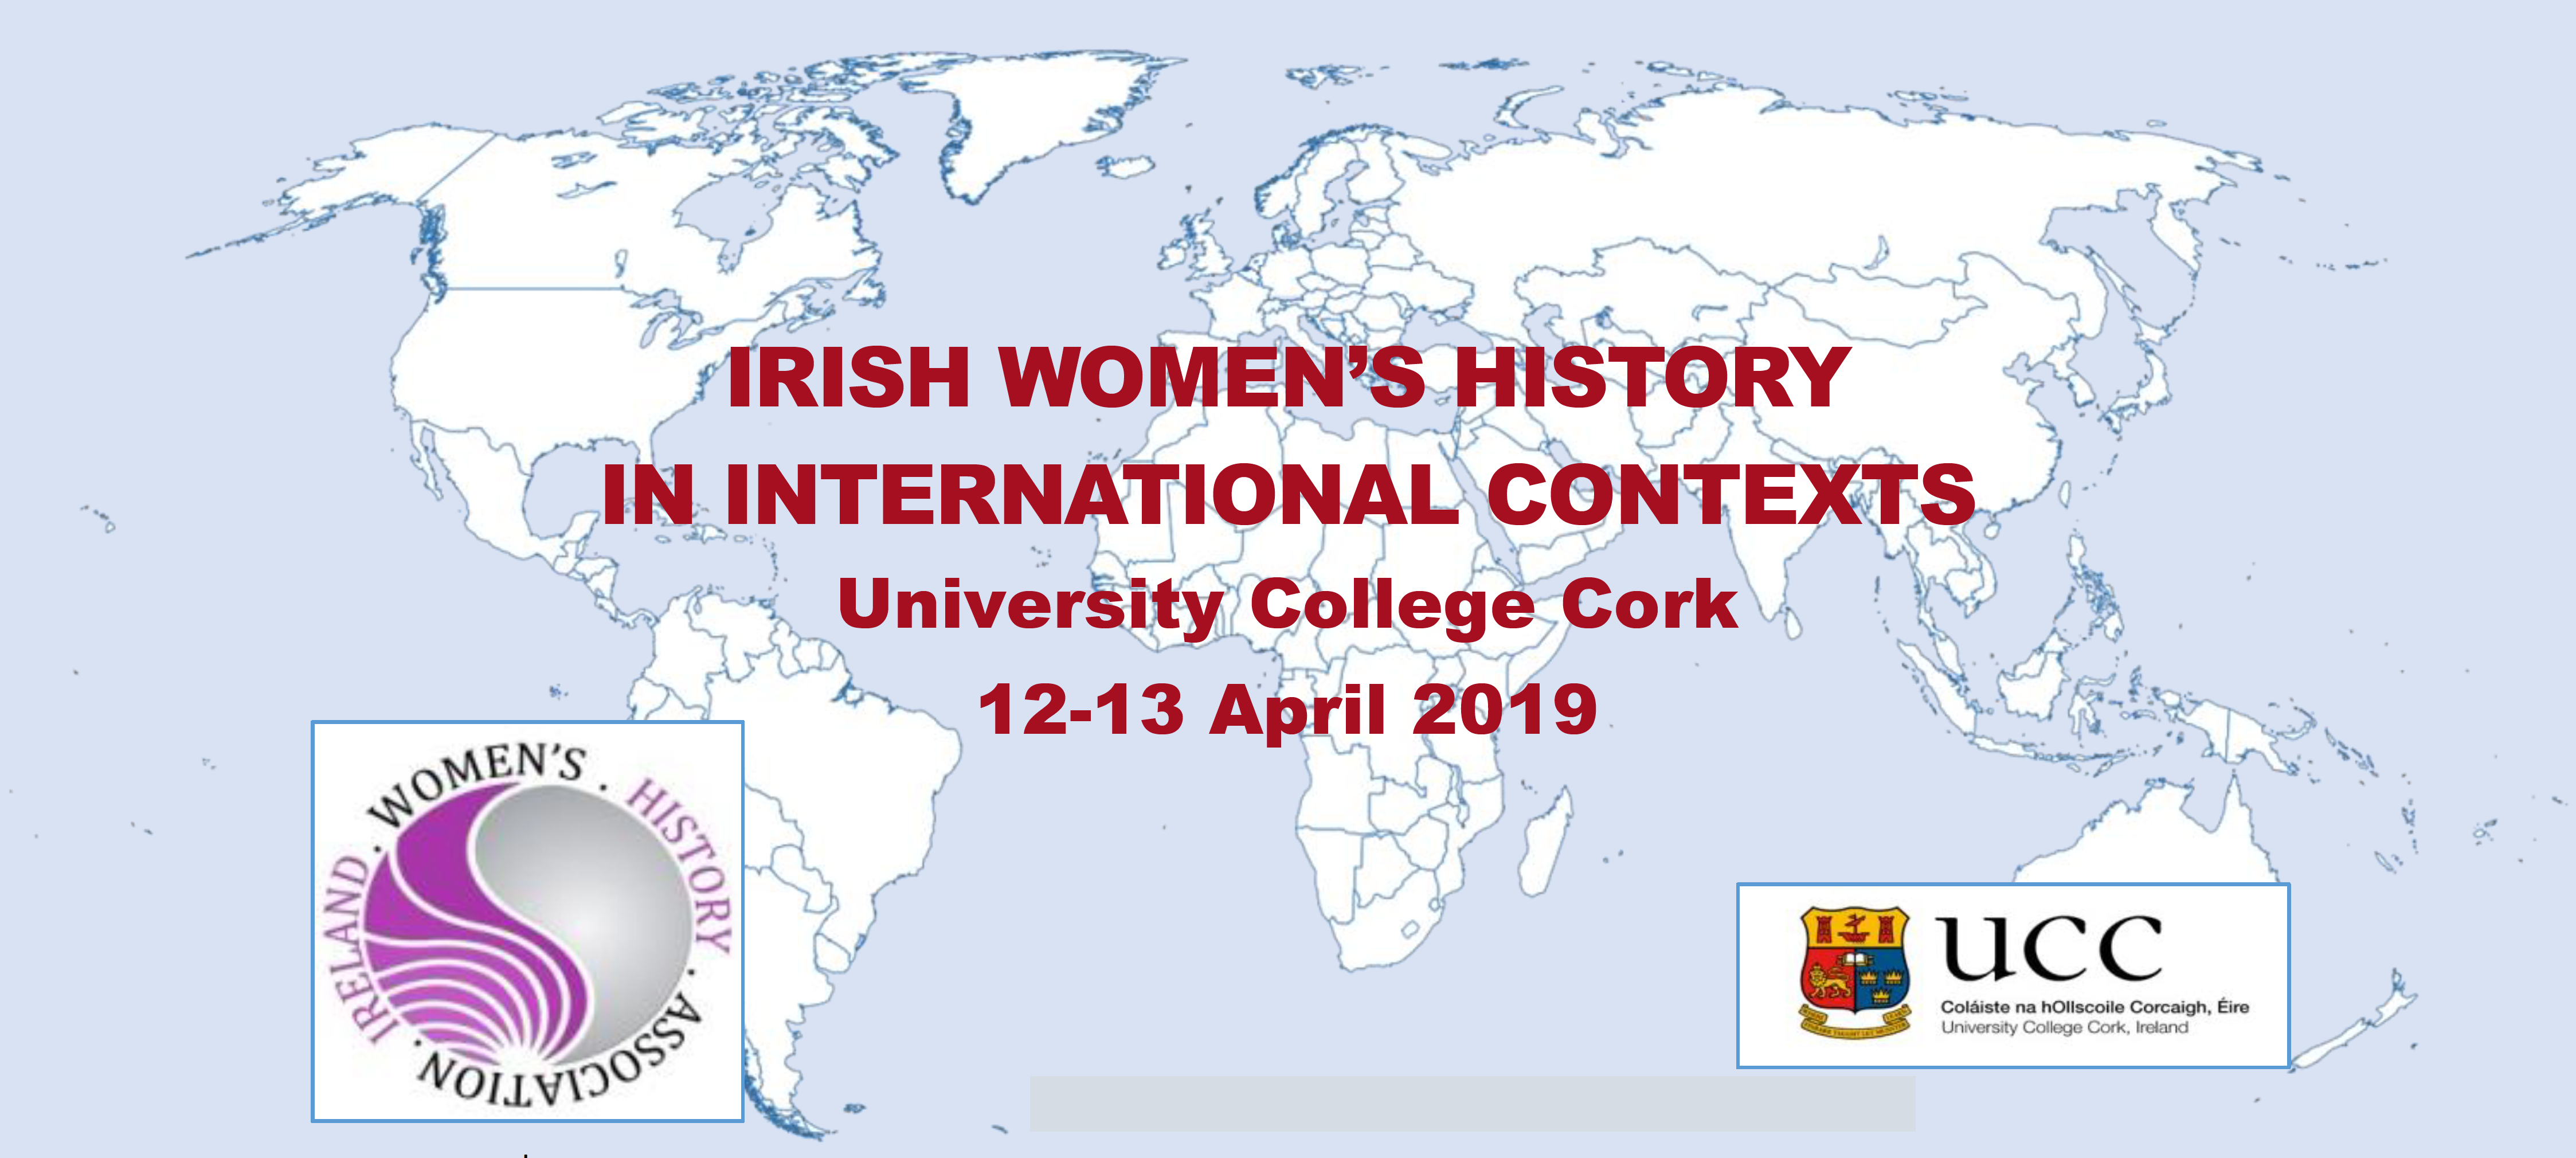 Conference call for papers: Irish Women's History in International Contexts, University College Cork, 12-13 April 2019.